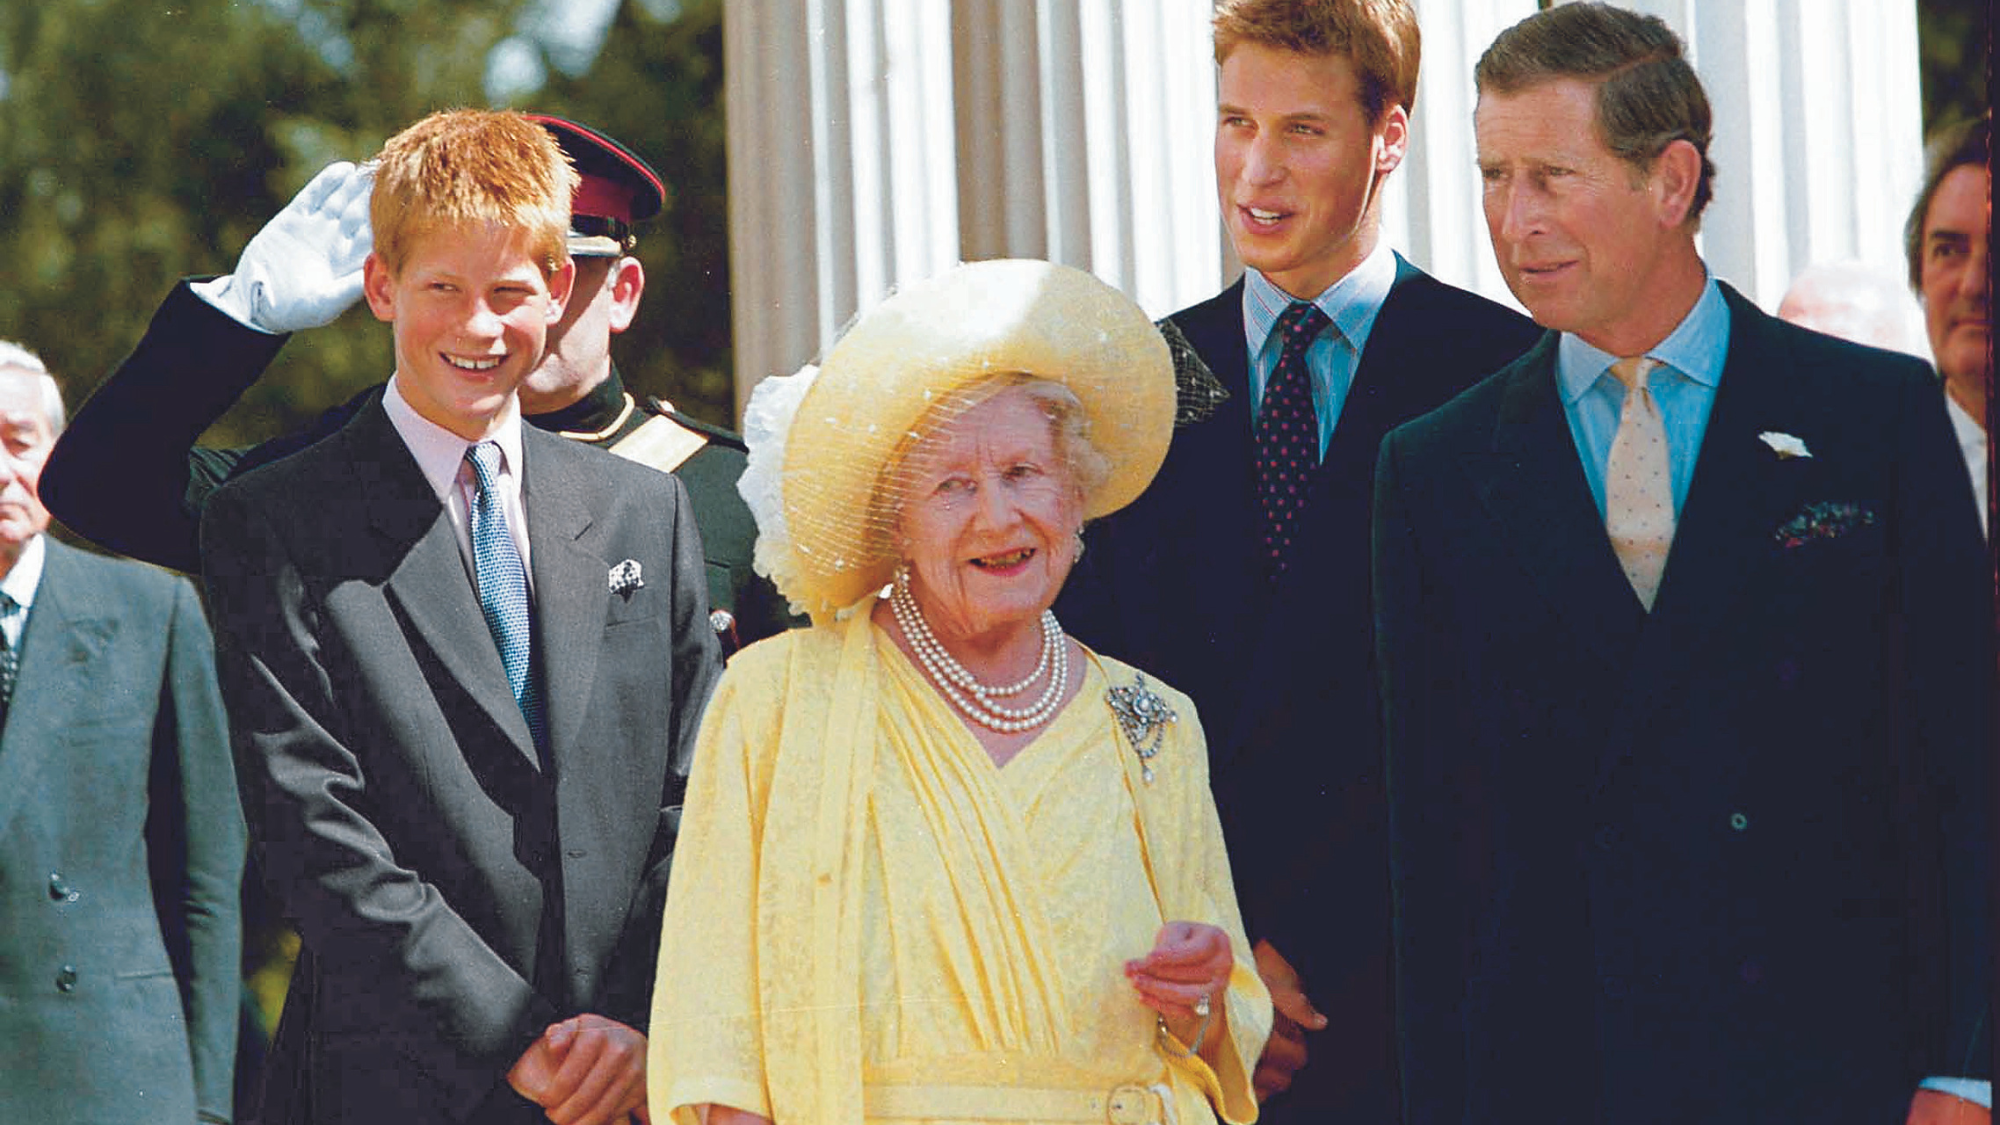 Prince William Once Said The Queen Mother Wanted Party Invites When He Went Off to College